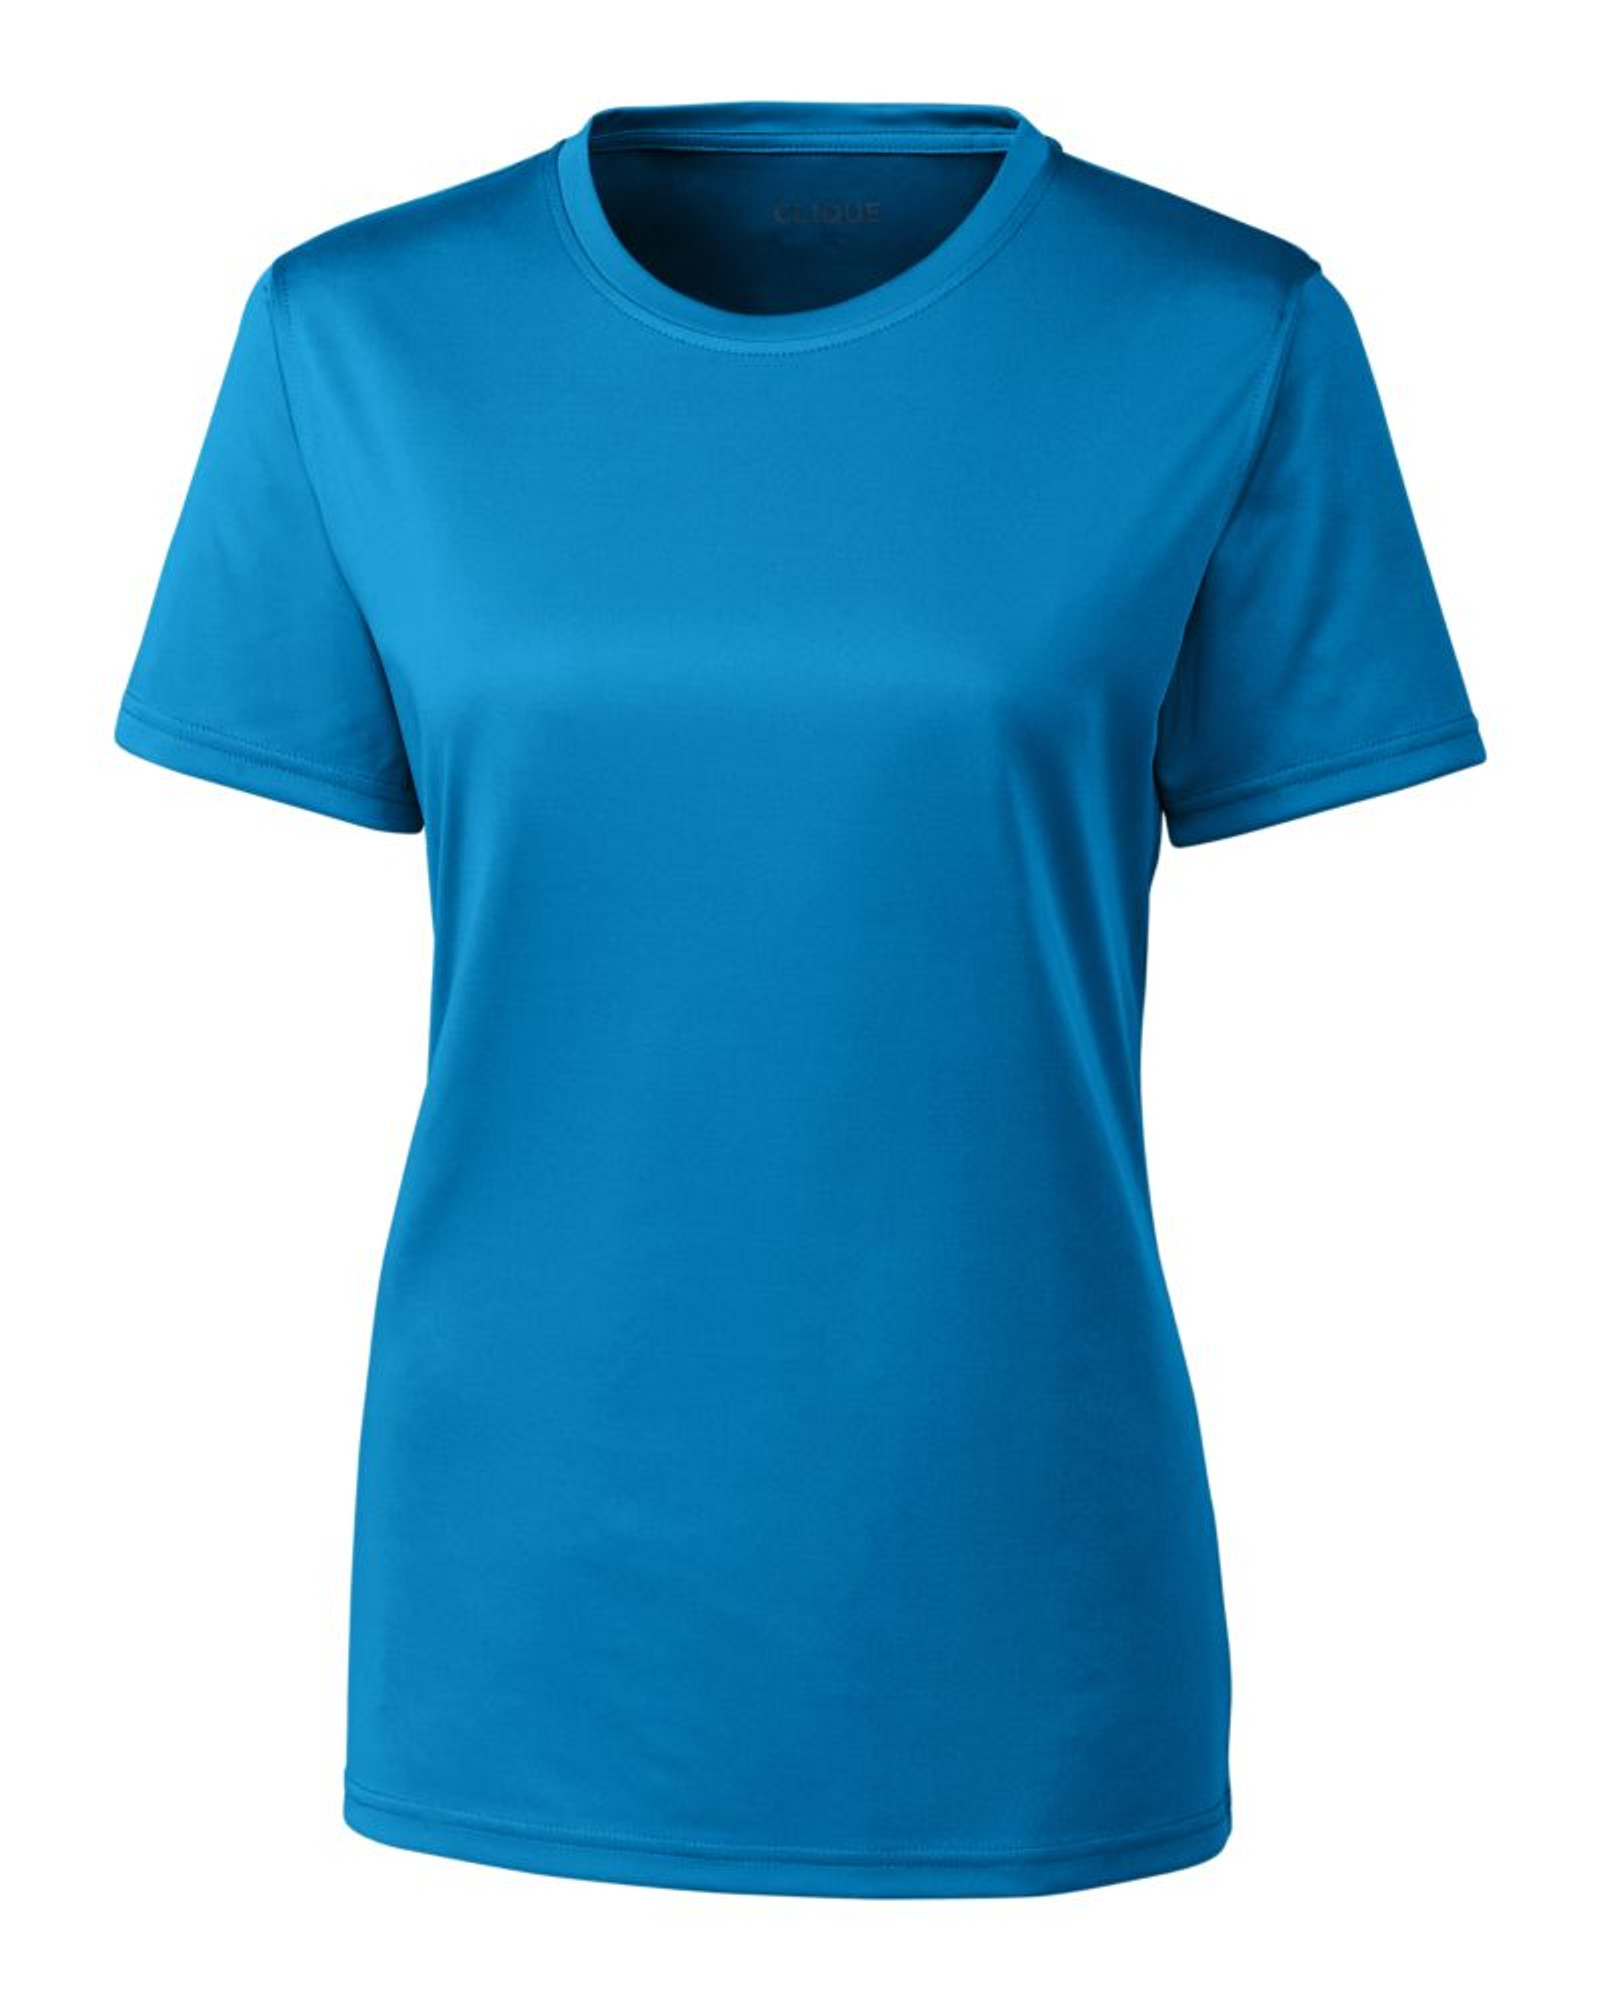 Clique Spin Eco Performance Jersey Short Sleeve Womens's Tee